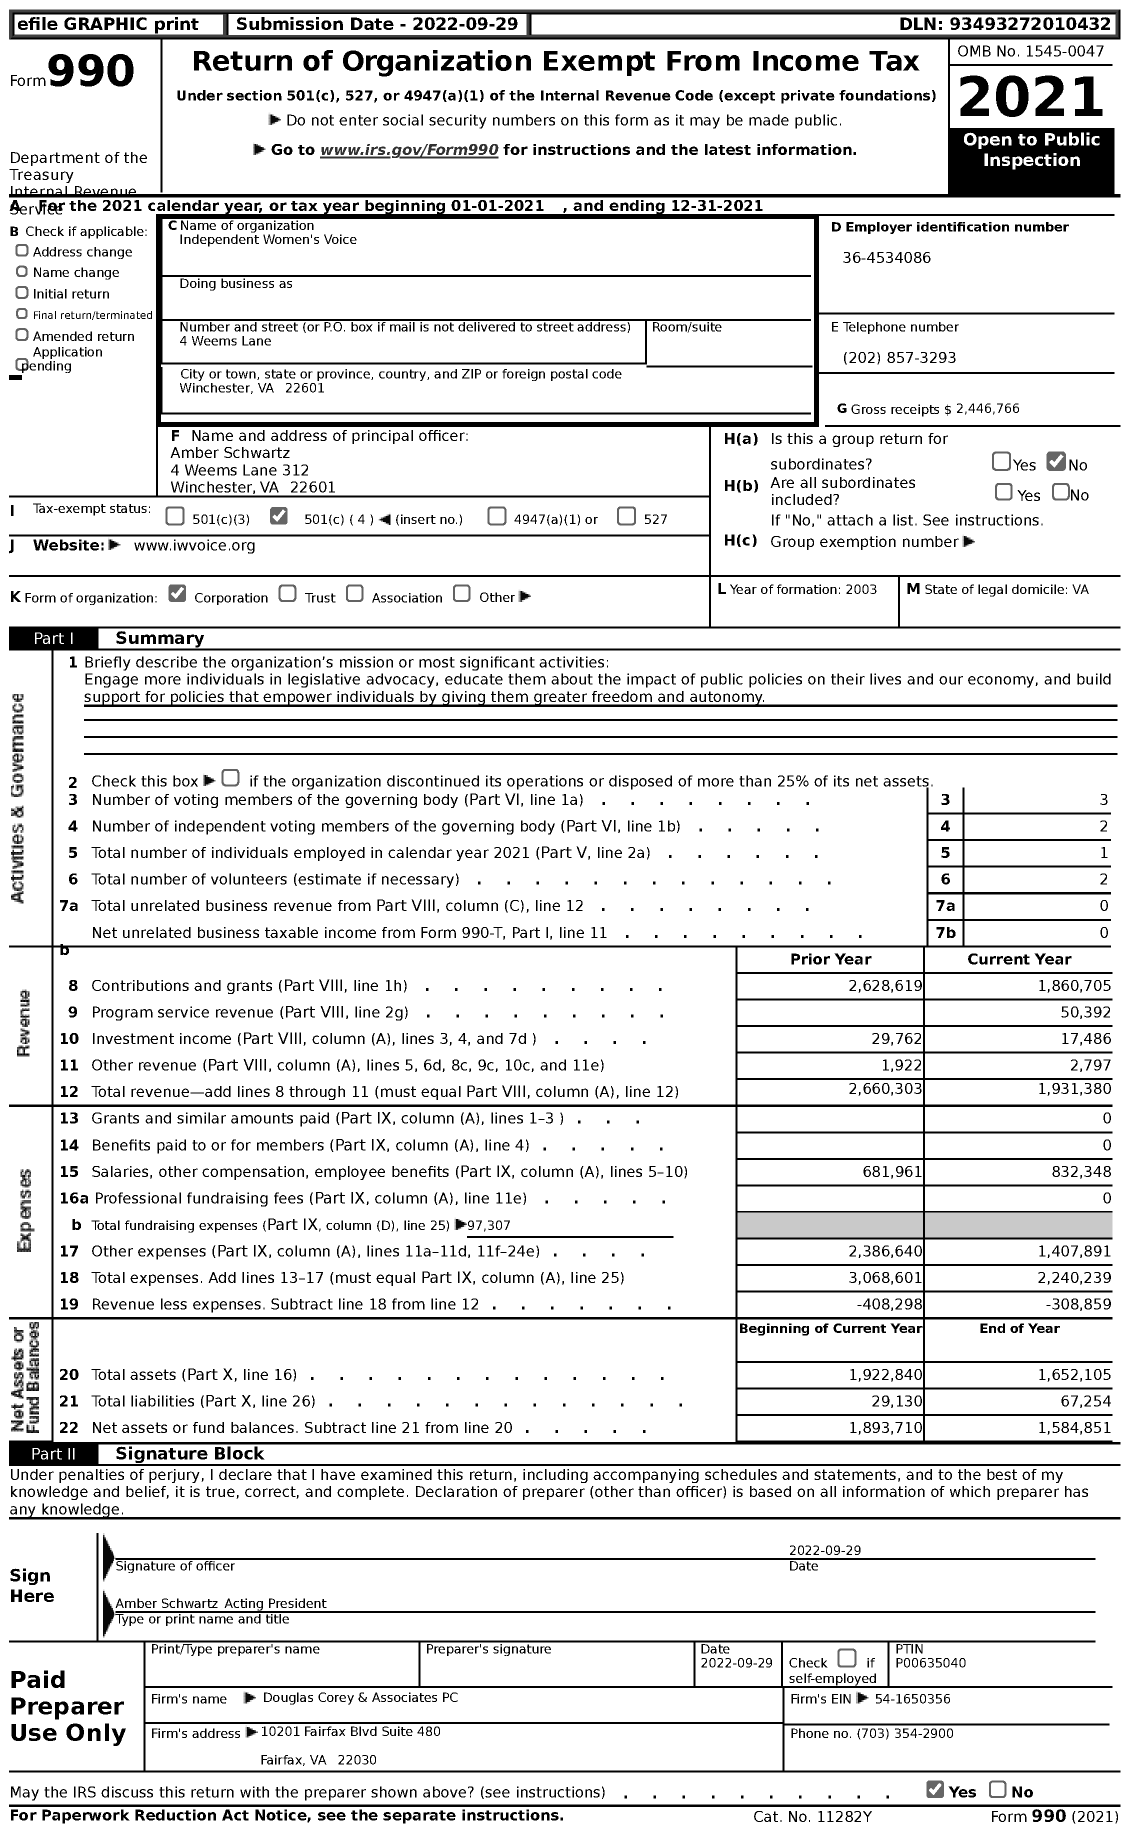 Image of first page of 2021 Form 990 for Independent Women's Voice (IWV)